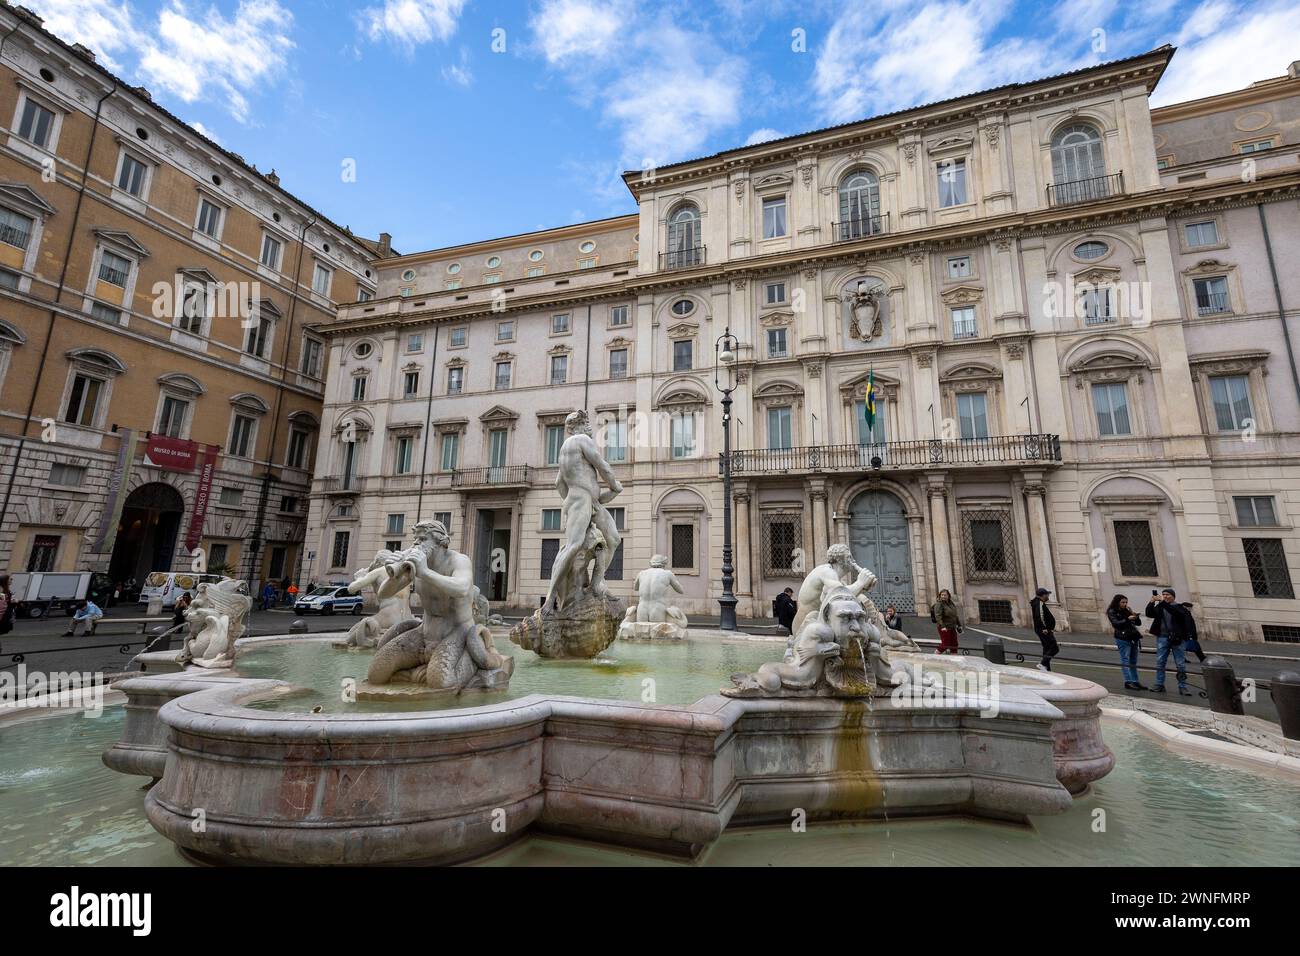 Rome, Italy. March 03, 2023: Fontana del Moro (Moor Fountain) is a fountain located at the southern end of the Piazza Navona in Rome, Italy. Brazilian Stock Photo